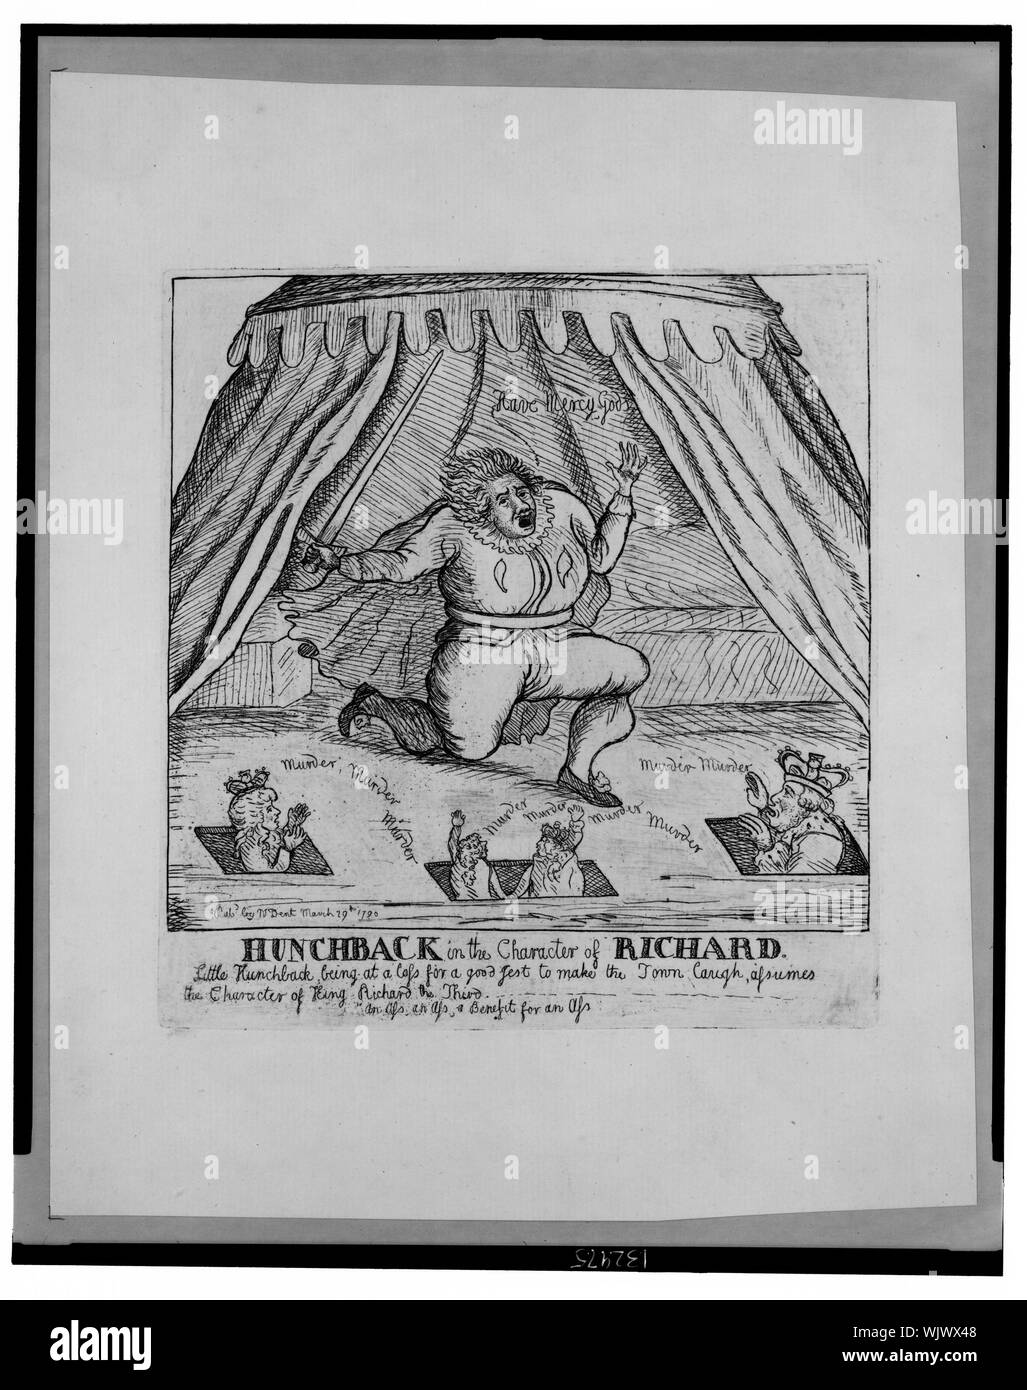 Hunchback in the character of Richard Abstract: Print shows an actor portraying Richard III in a tent on a stage, appearing through trap doors in the stage are a king, queen, prince regent, and another prince, all crying Murder. Stock Photo